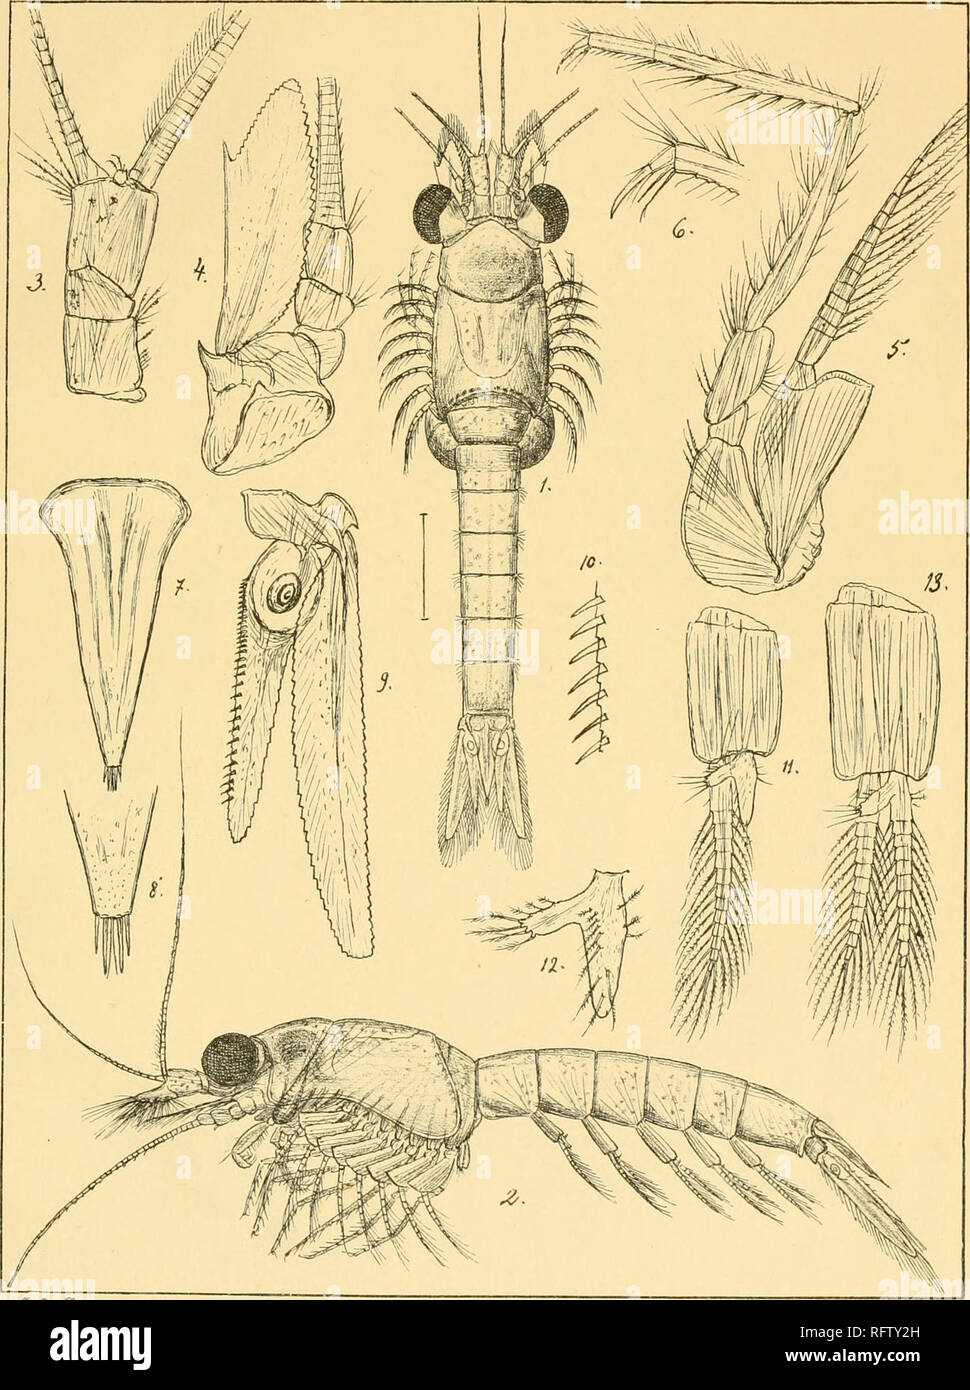 Carcinologiske bidrag til Norges fauna. Mysidae; Crustacea. :^ xxxvx..  v-O-Oca^i a.ujtc^ffr: l.rehrriiih.In^i: Ja-rerytAr-o^s rolu^tjx^^fS^nctÃ  -),. Please note that these images are extracted from scanned page images  that may have been digitally